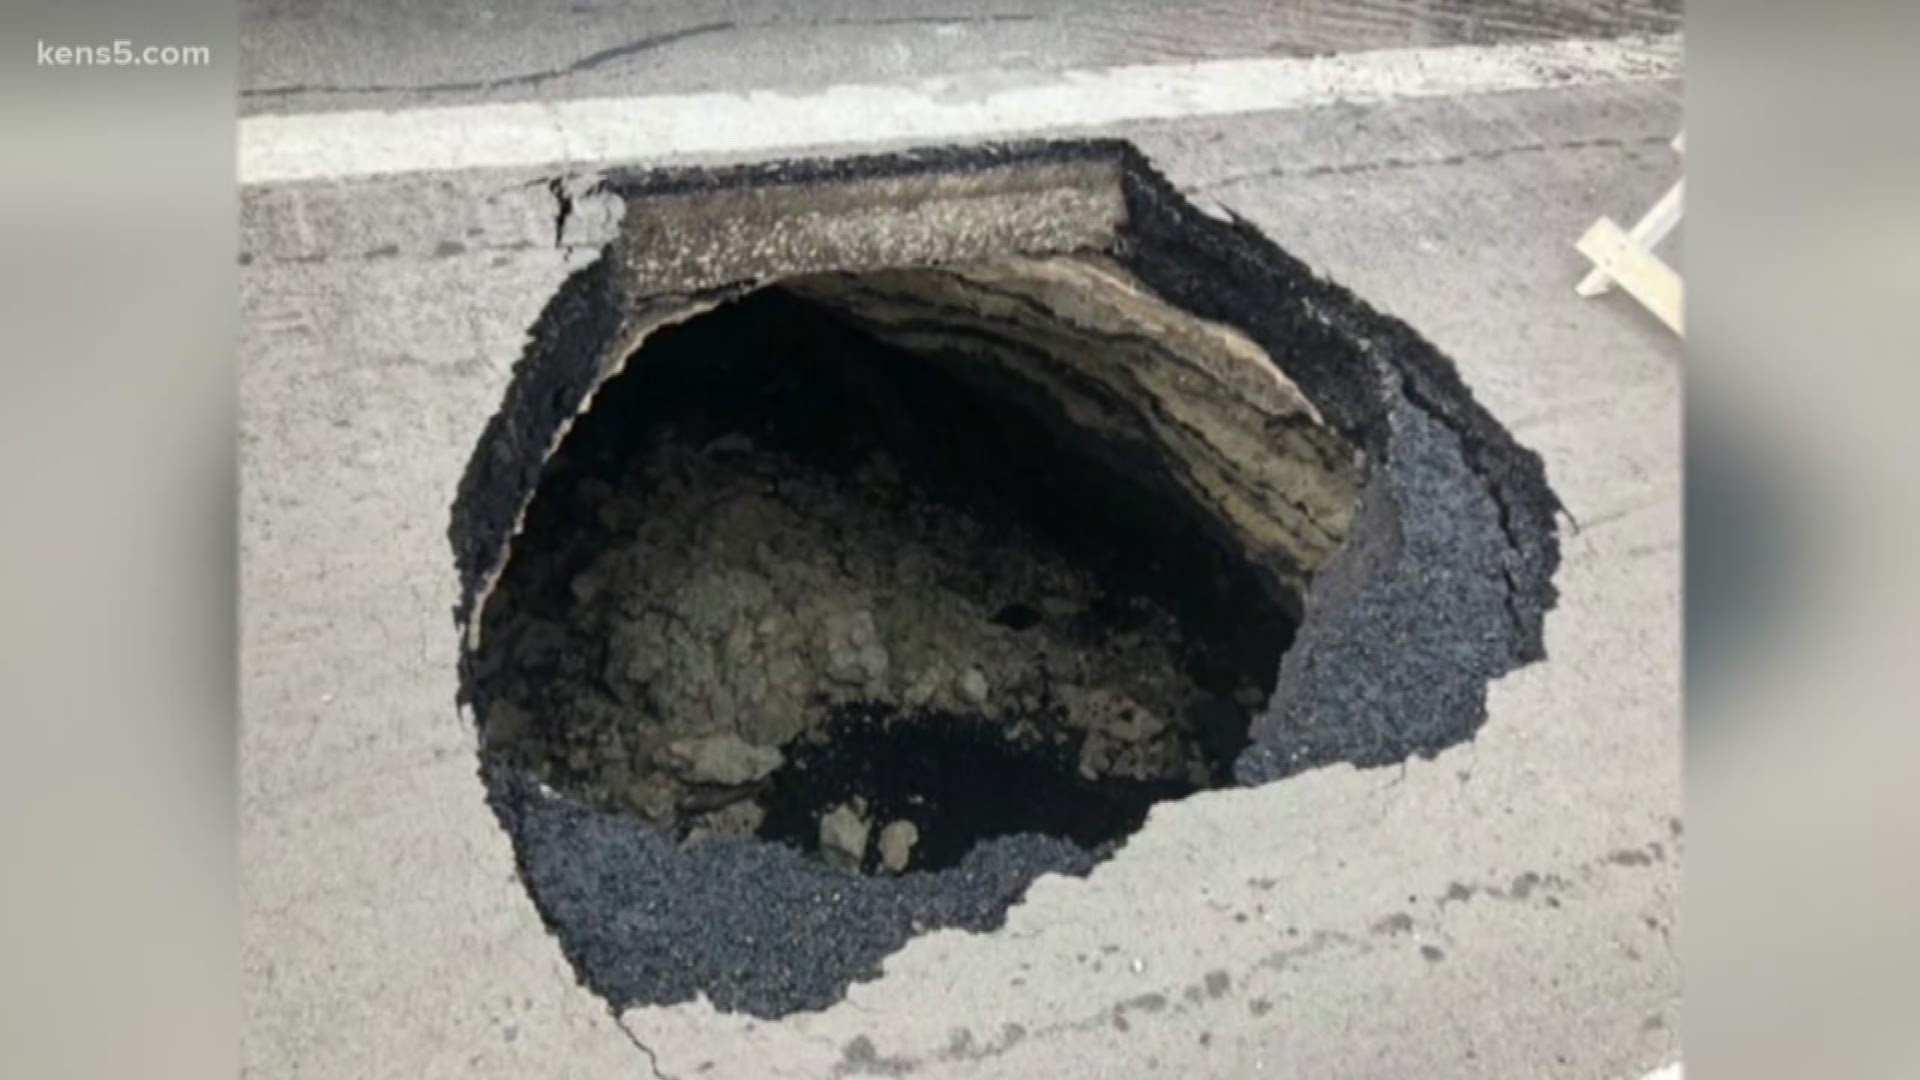 A sinkhole has shut down lanes along I-410 southbound to US 90 westbound.

Traffic on 410 is being diverted to the frontage road and taken to cloverleaf ramps to access US 90 westbound.